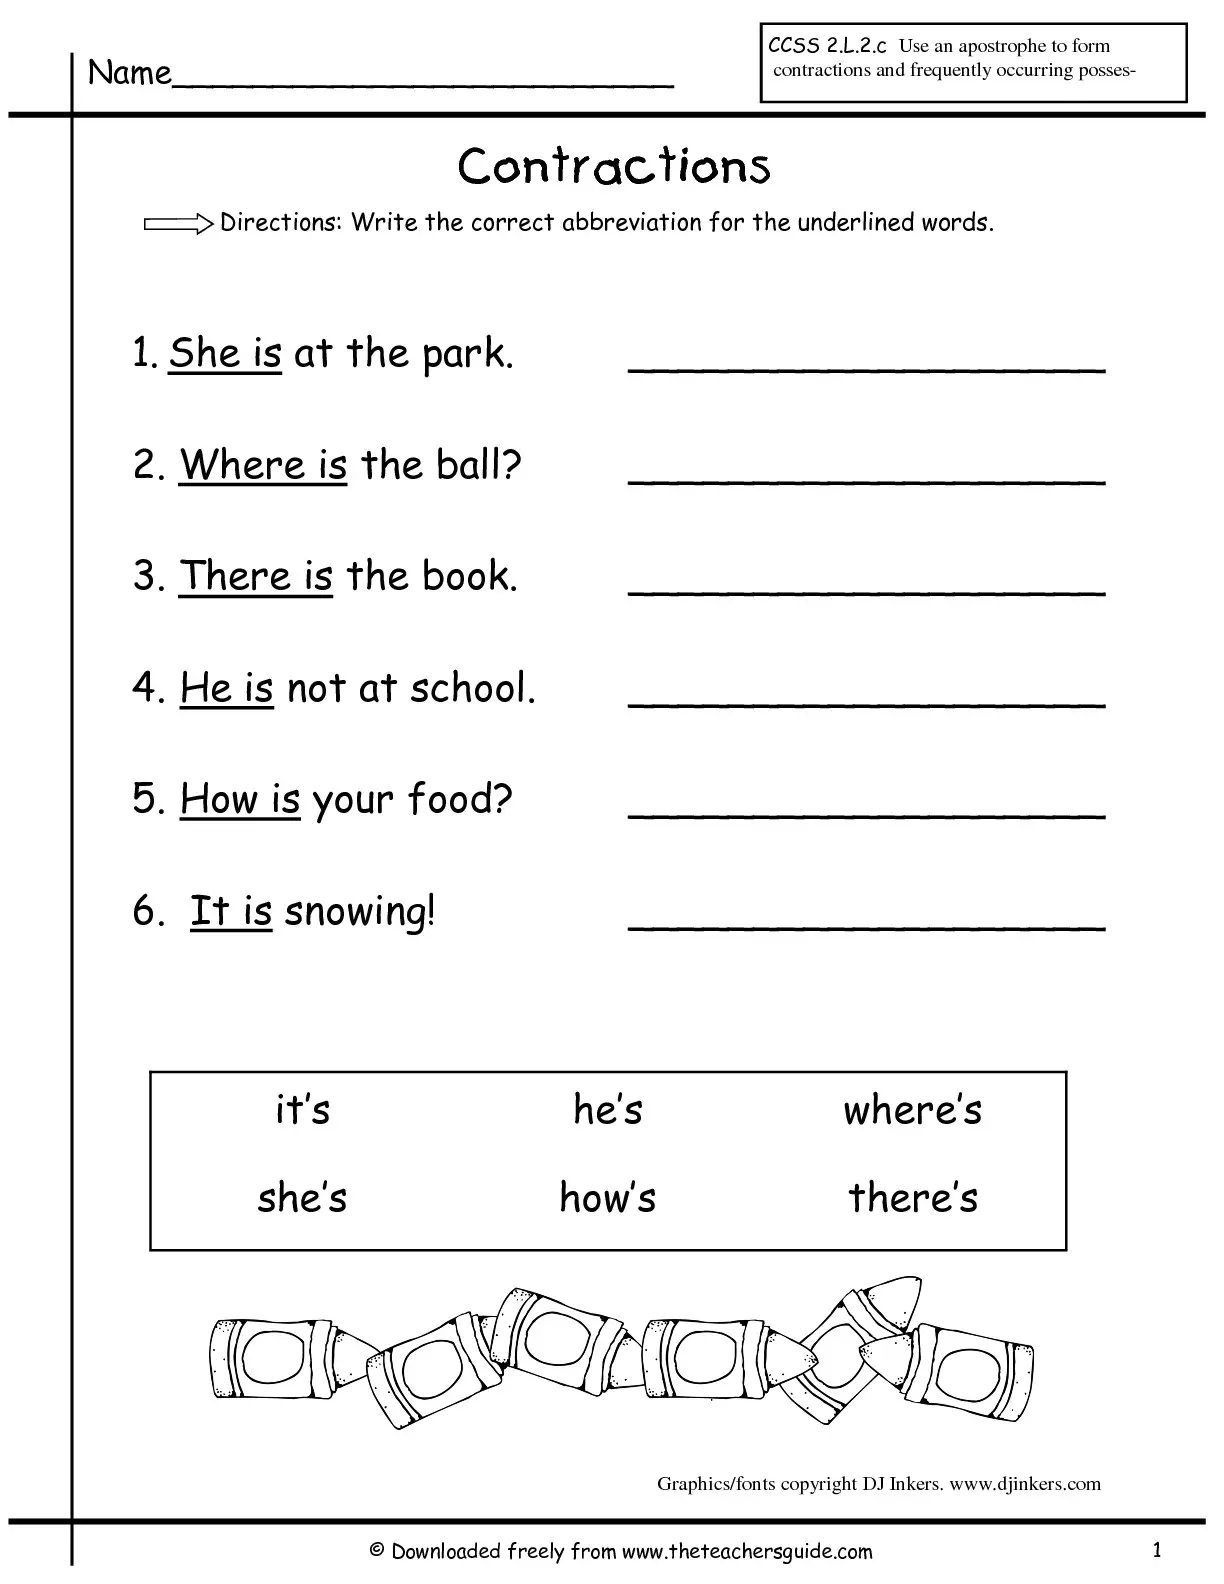 21 Contractions Worksheets for Improving Your Grammar - Kitty Baby With Contractions Worksheet 2nd Grade